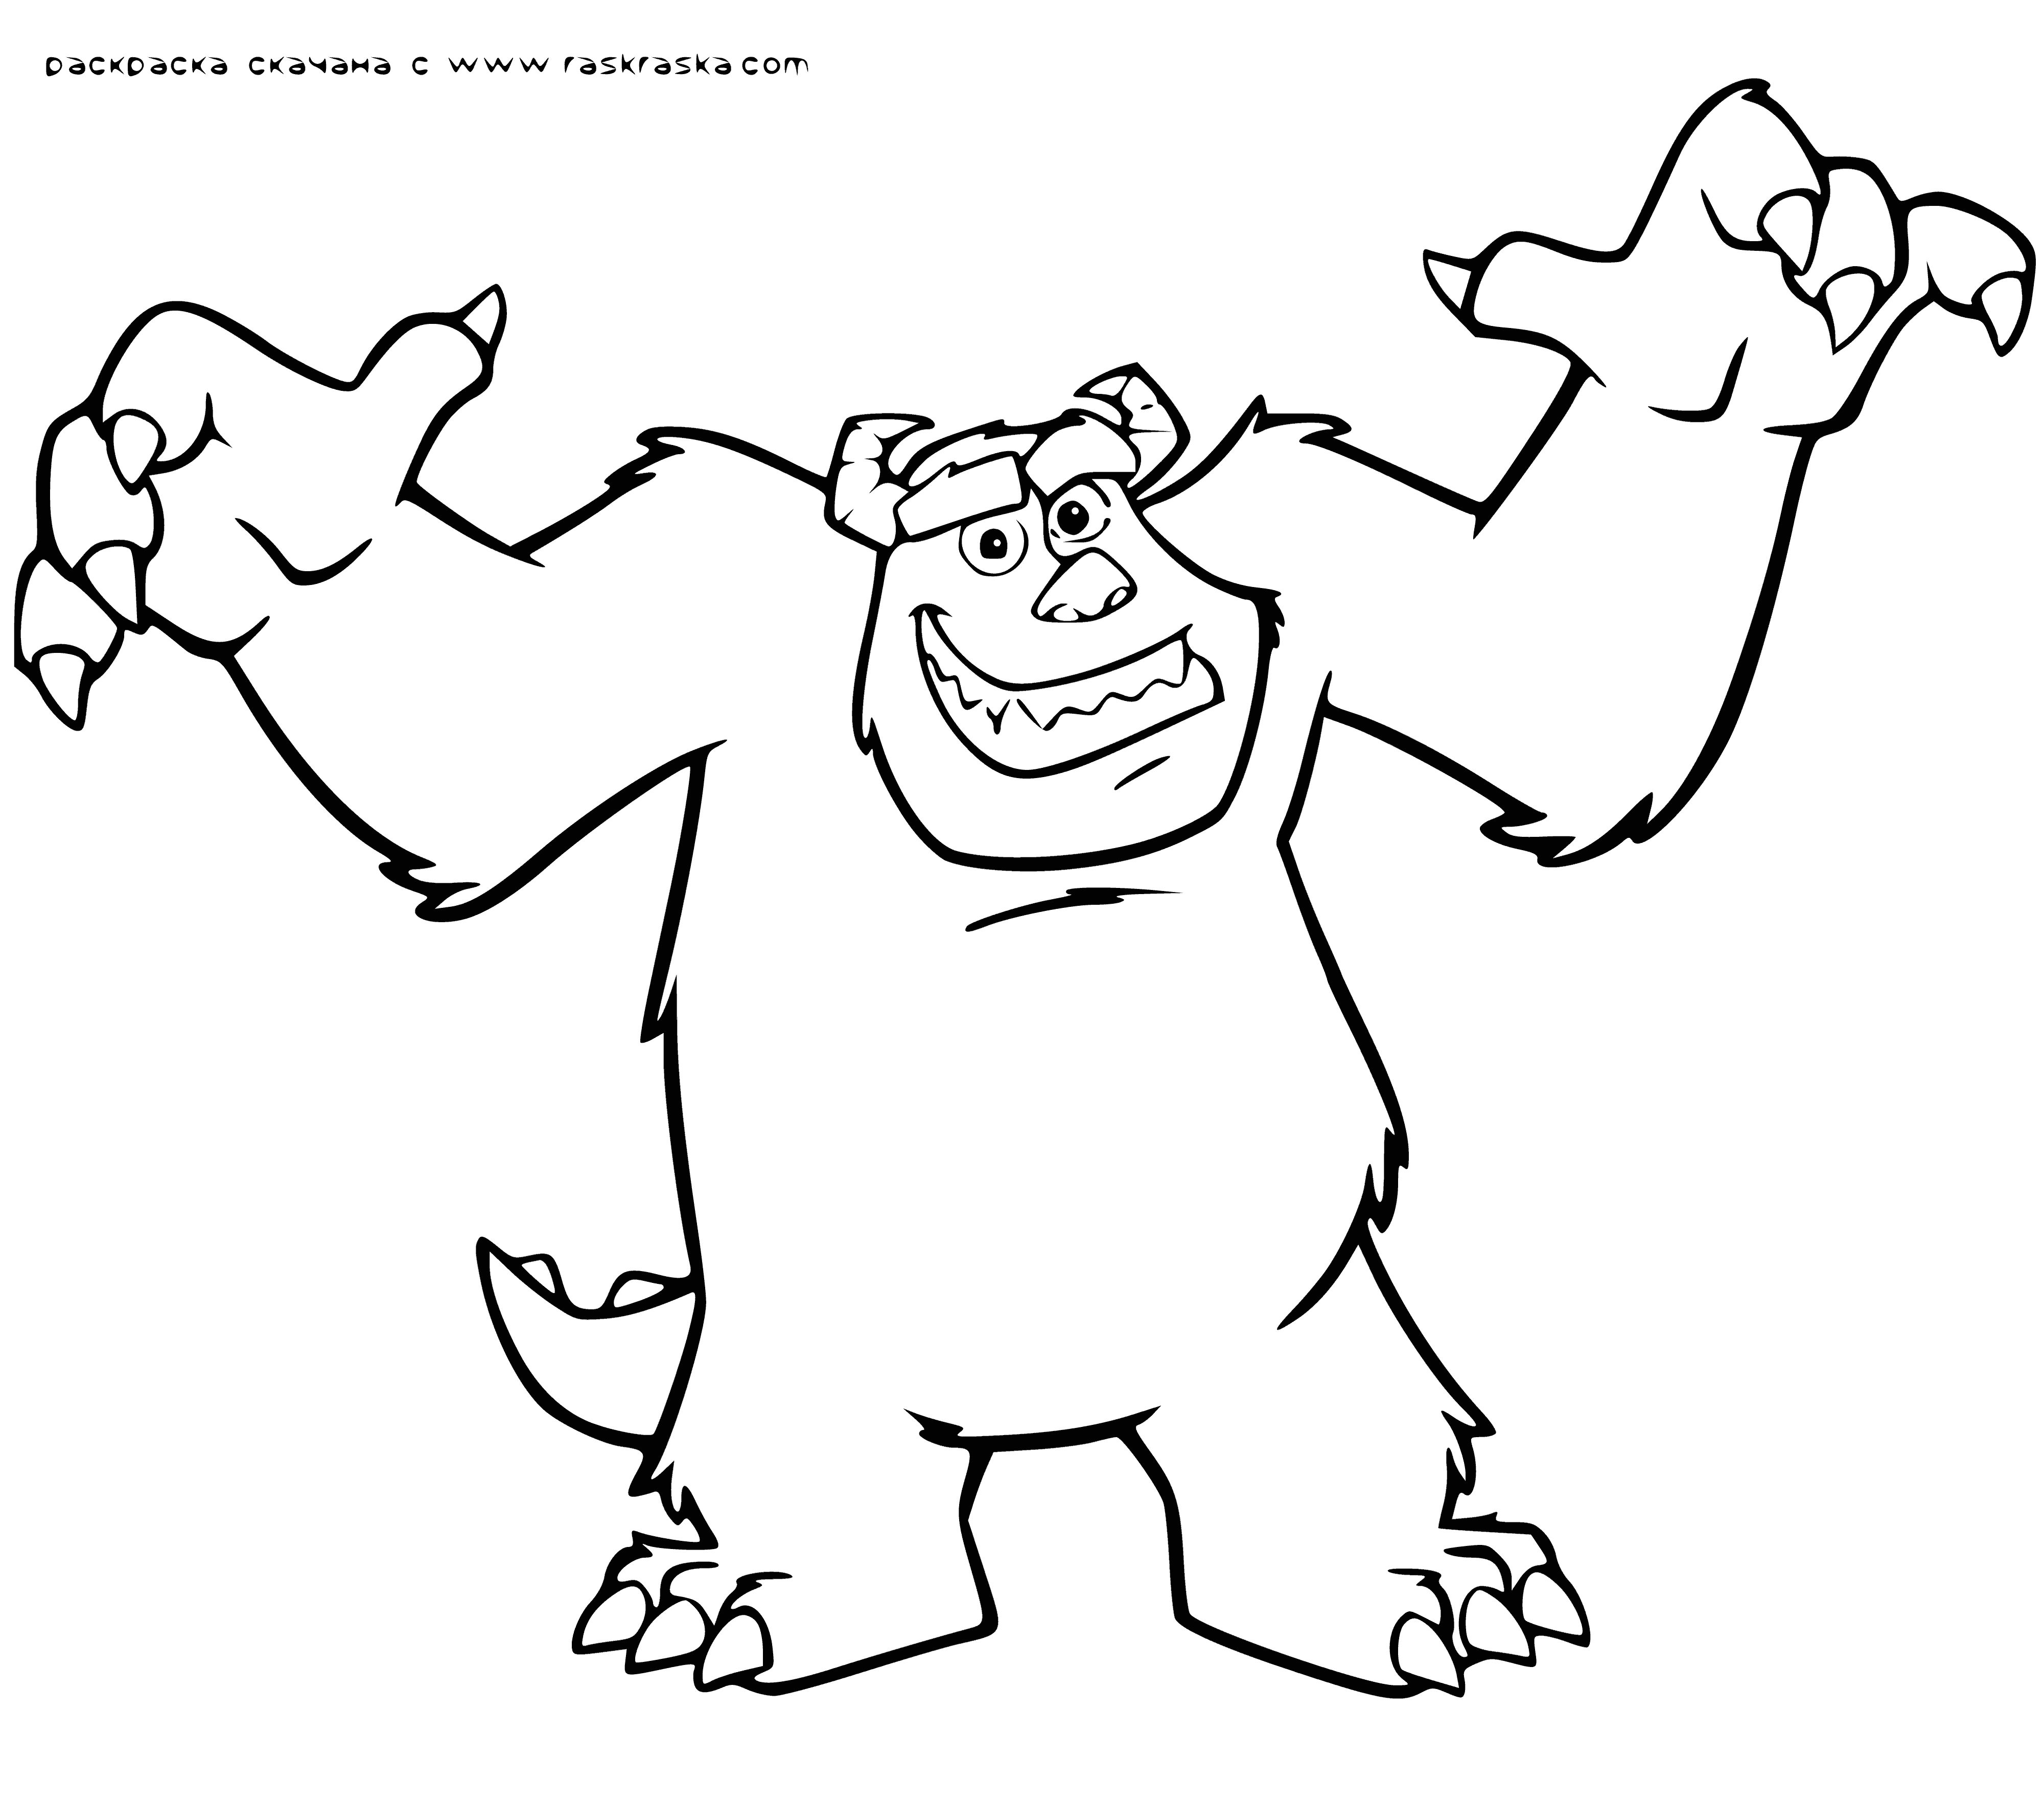 coloring page: Monsters and children gather round a cake with a single candle, laughing and shouting with excitement.